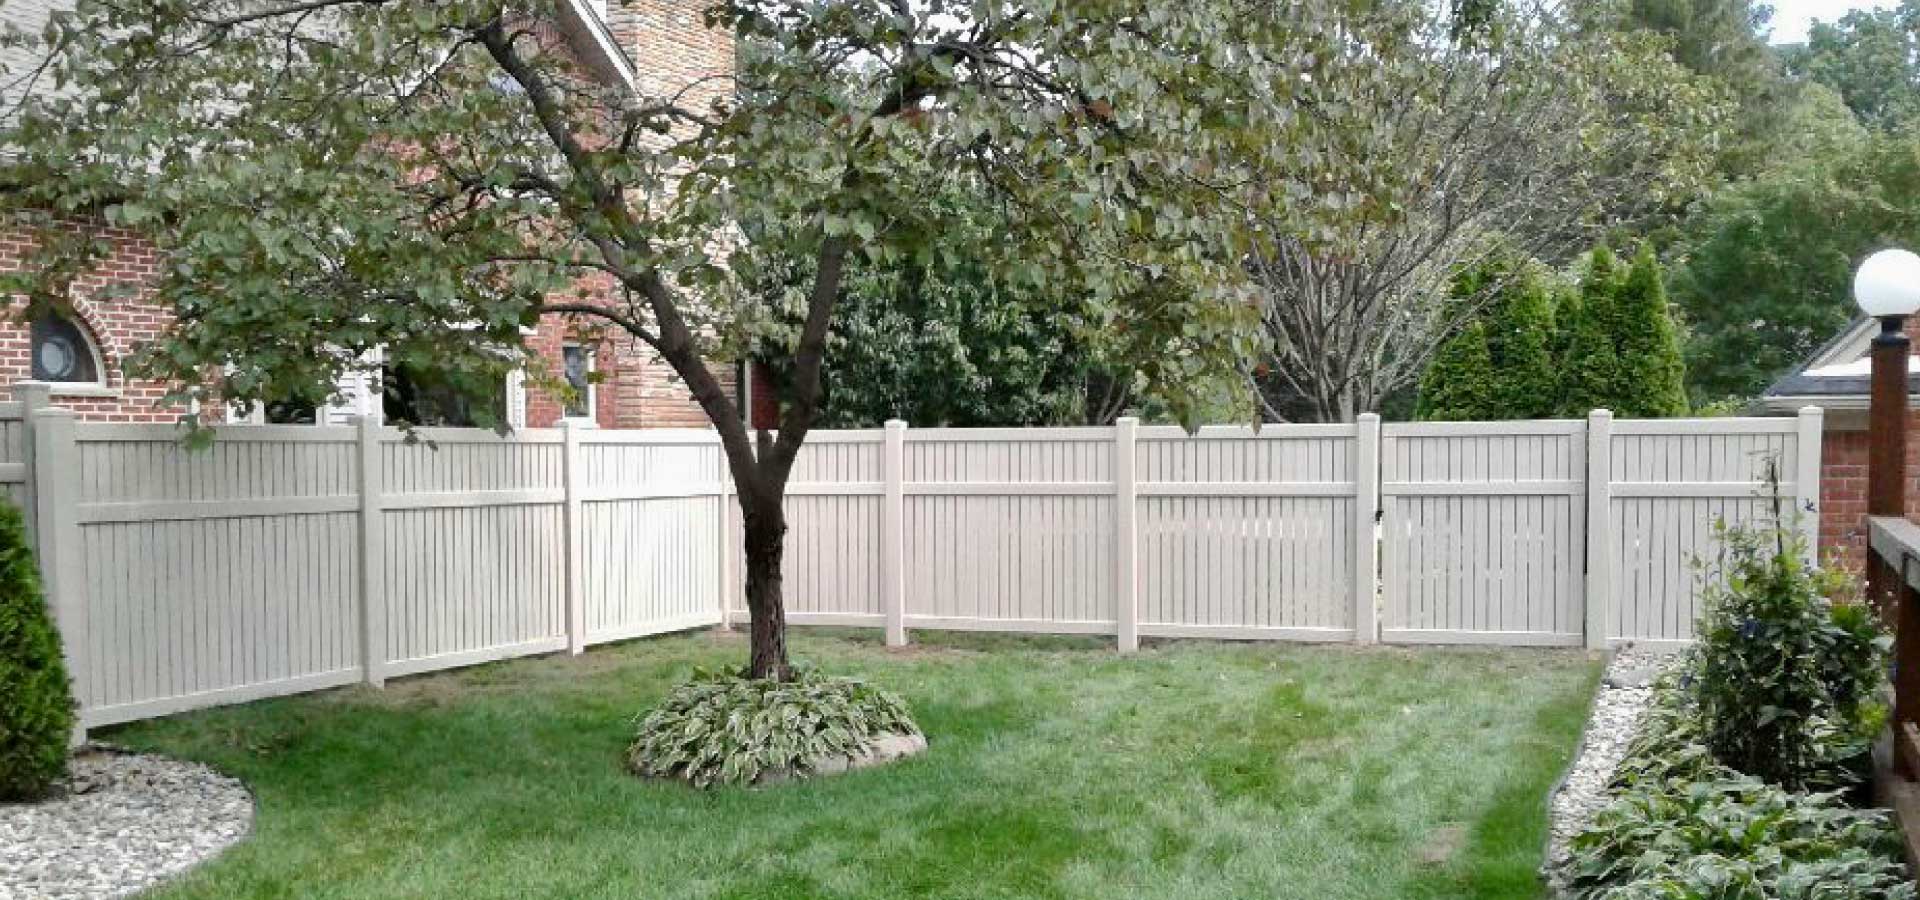 Get a quote for fencing services